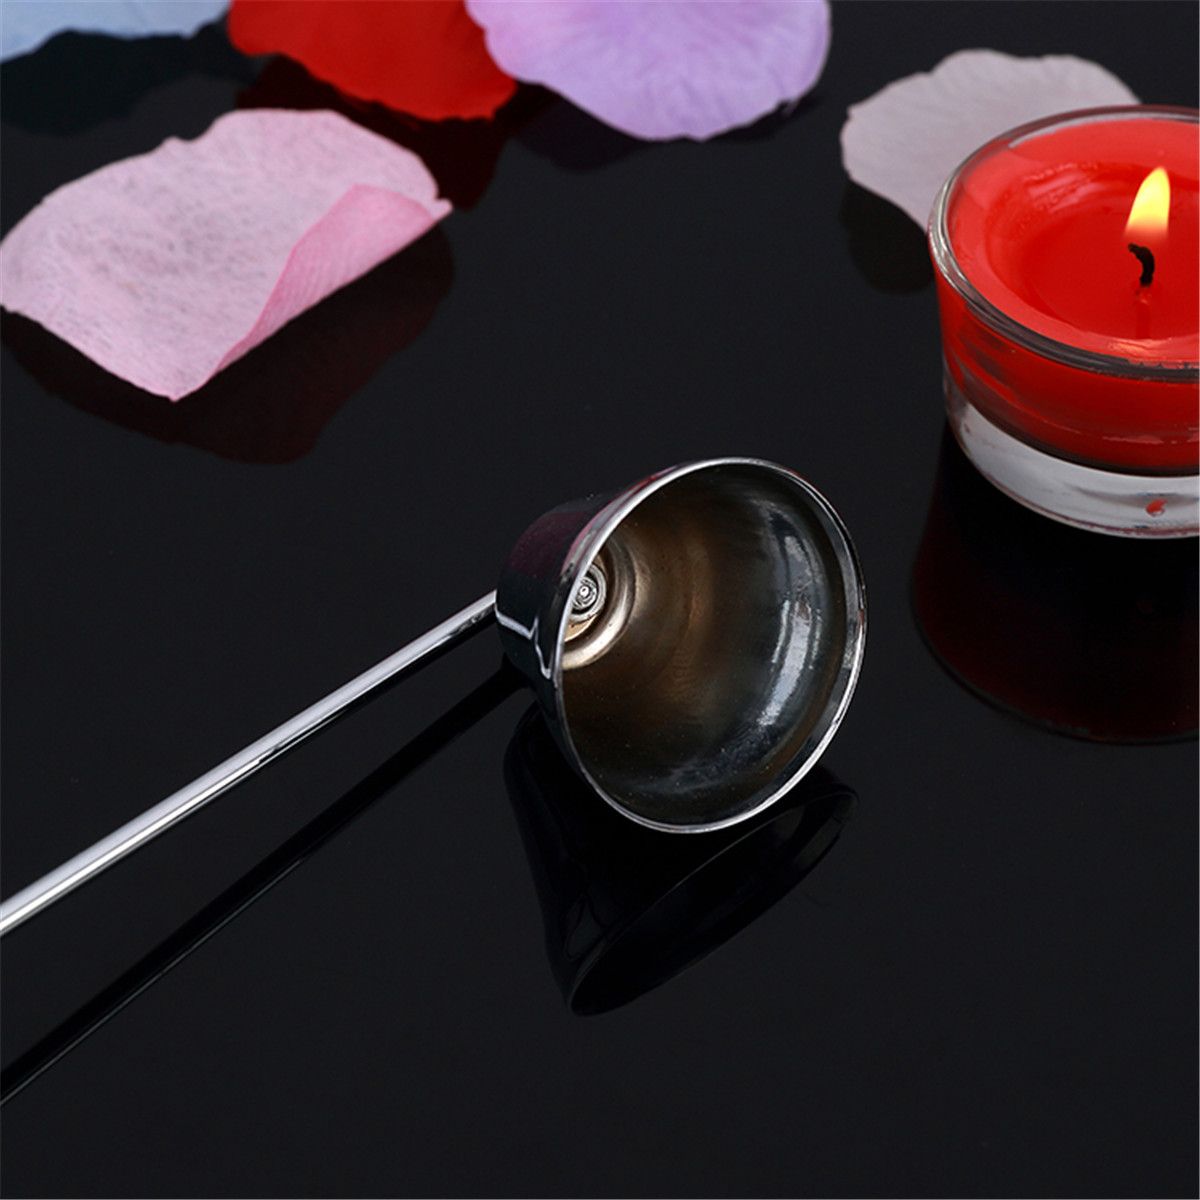 Stainless-Steel-Candle-Snuffer-Silver-Long-Extinguisher-for-Tea-Light-Candle-Tool-1252840